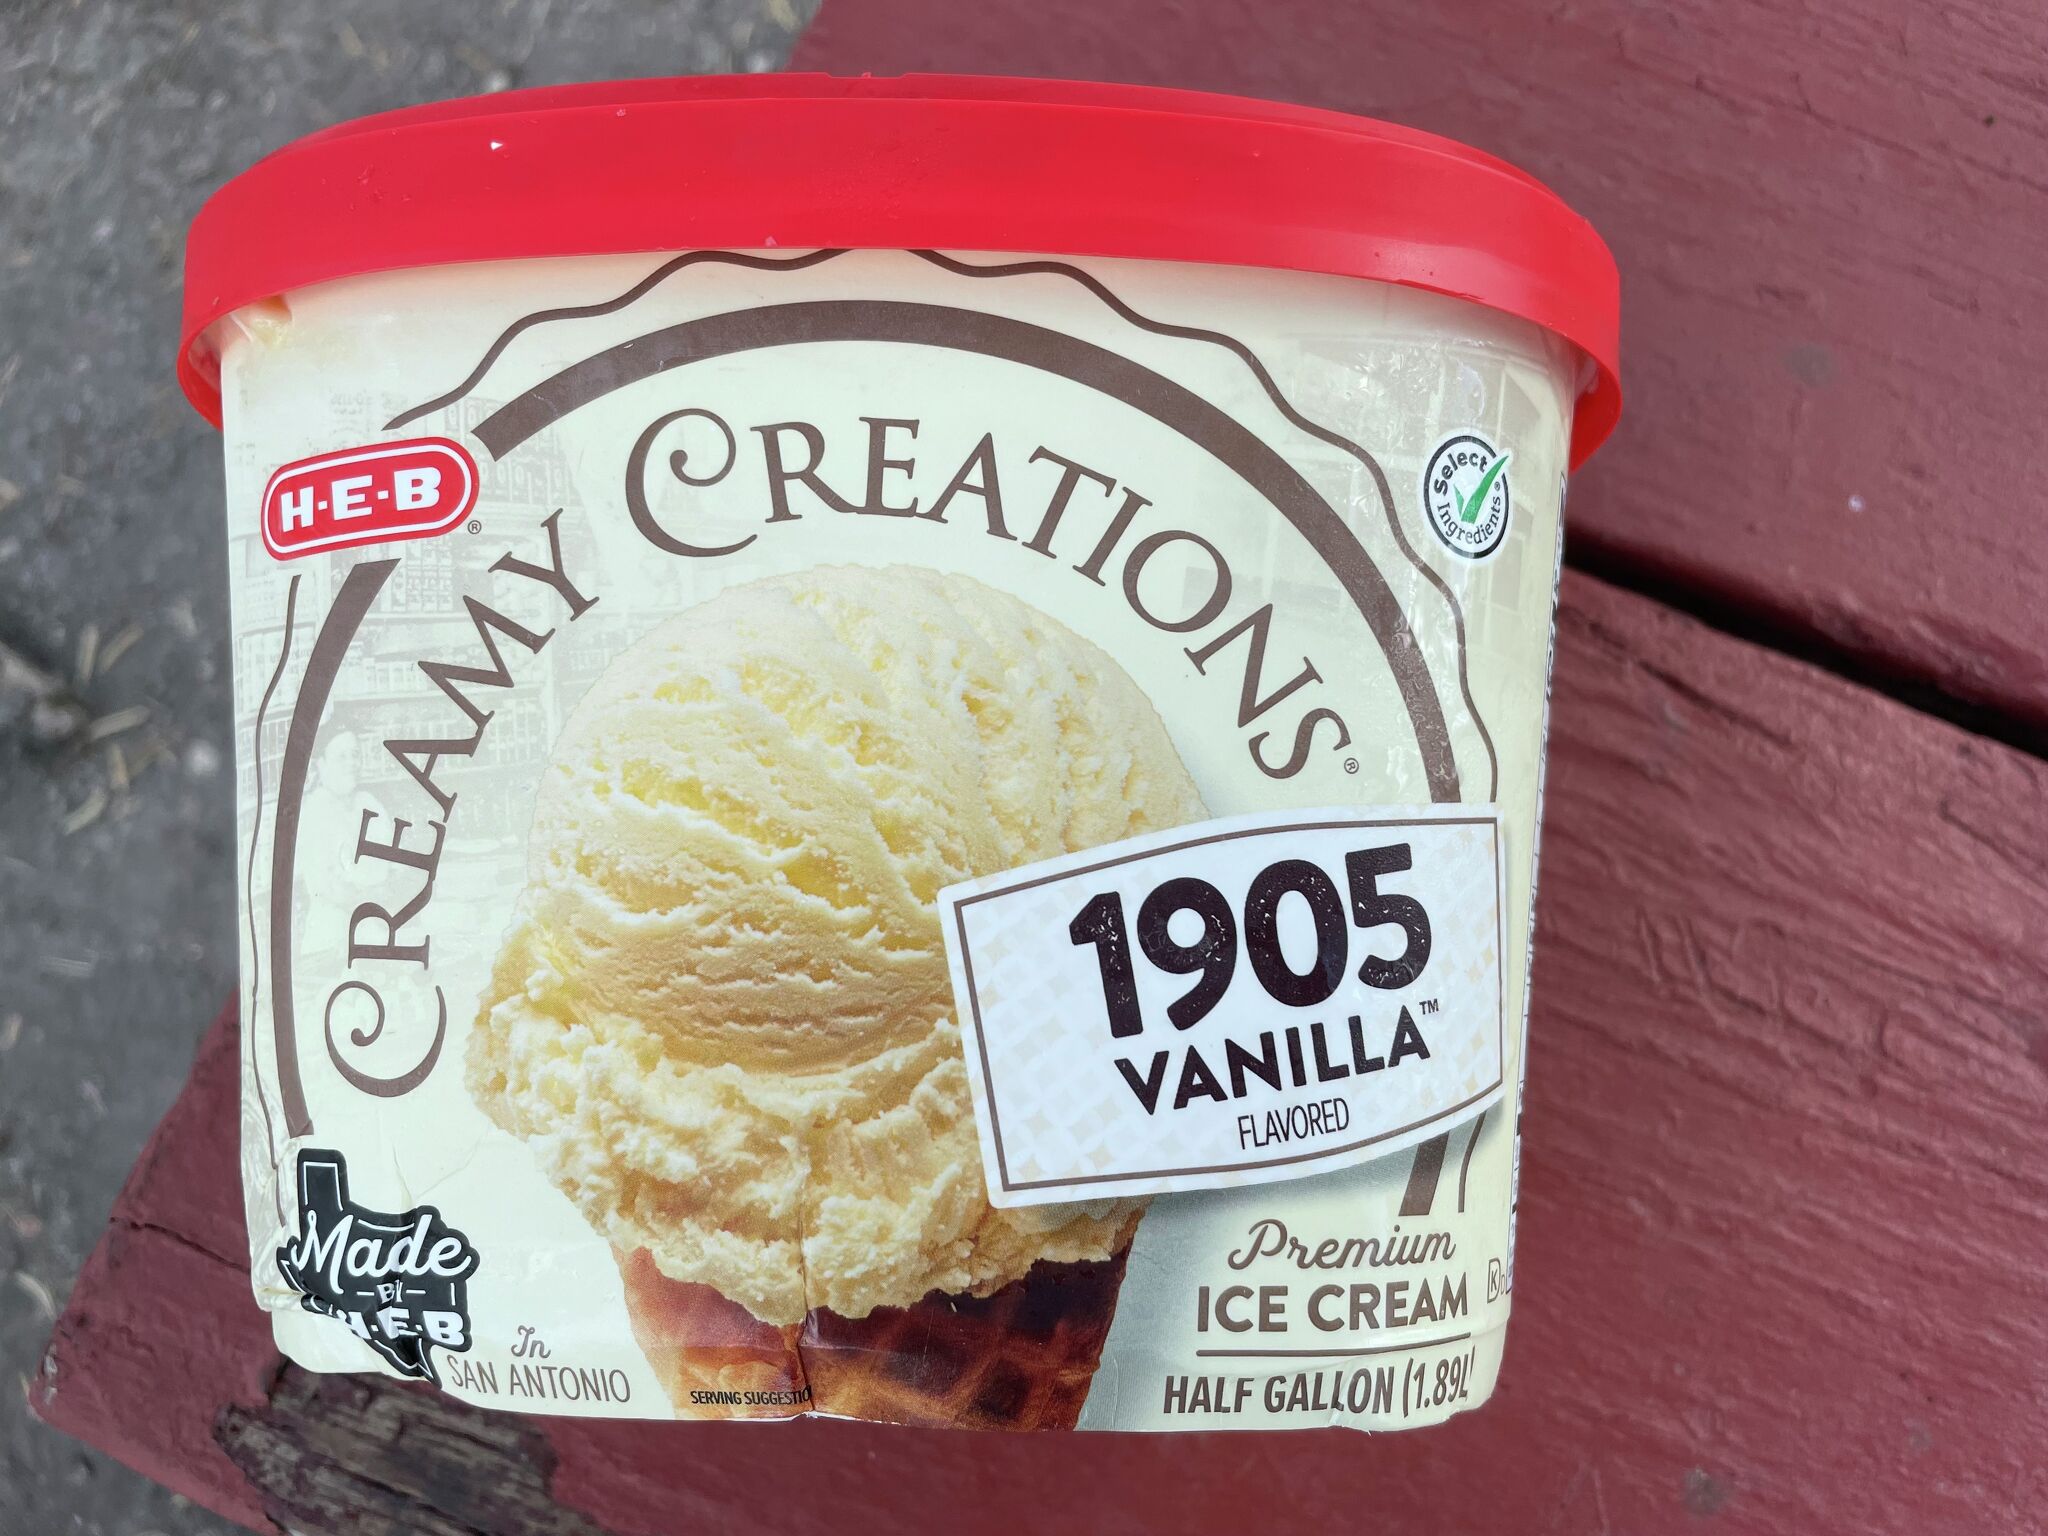 Texas Supermarket Pulls Ice Cream Off Shelves: What You Need to Know About the Metal Contamination Scare